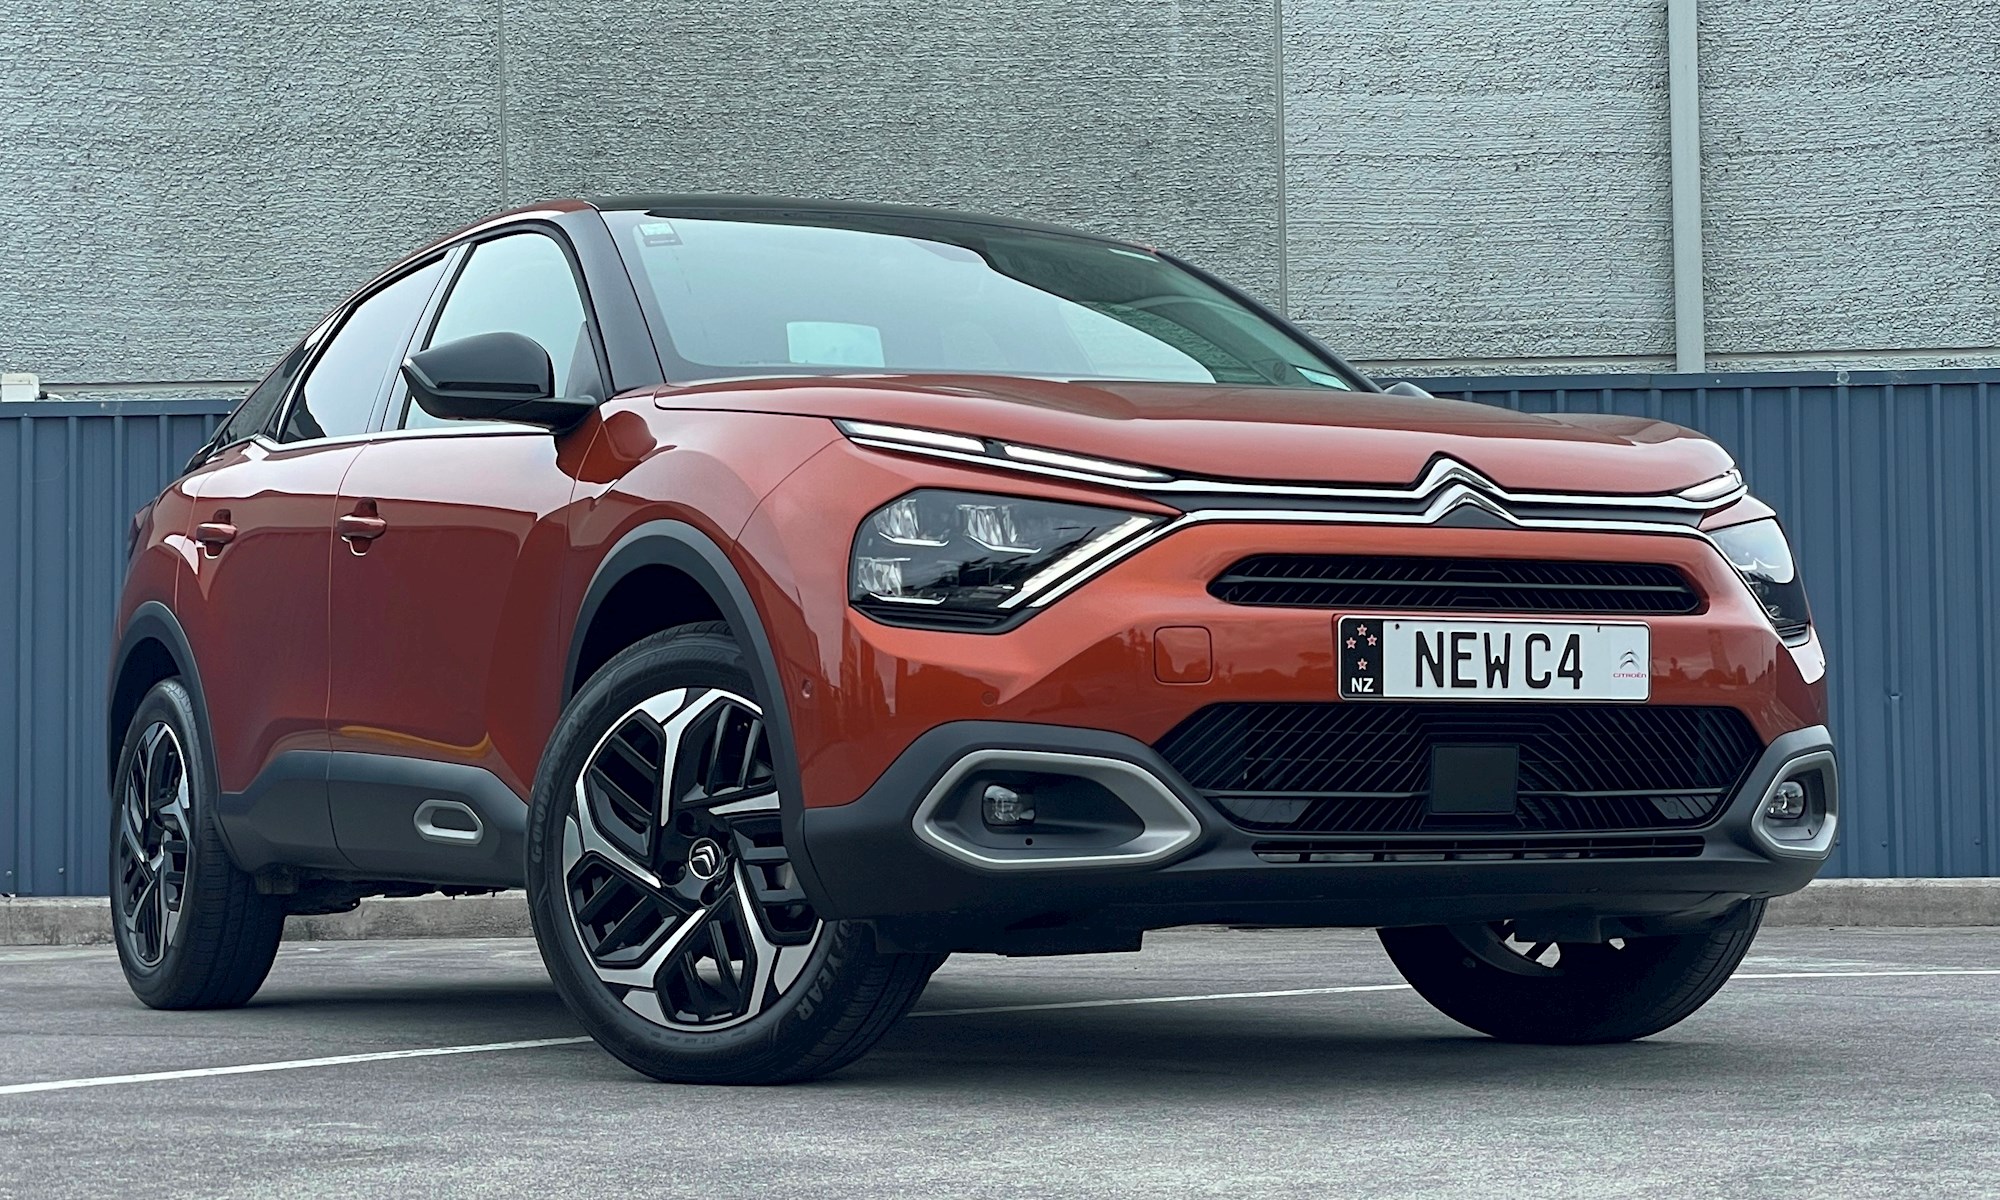 On the road: Citroën C4 Cactus – car review, Motoring